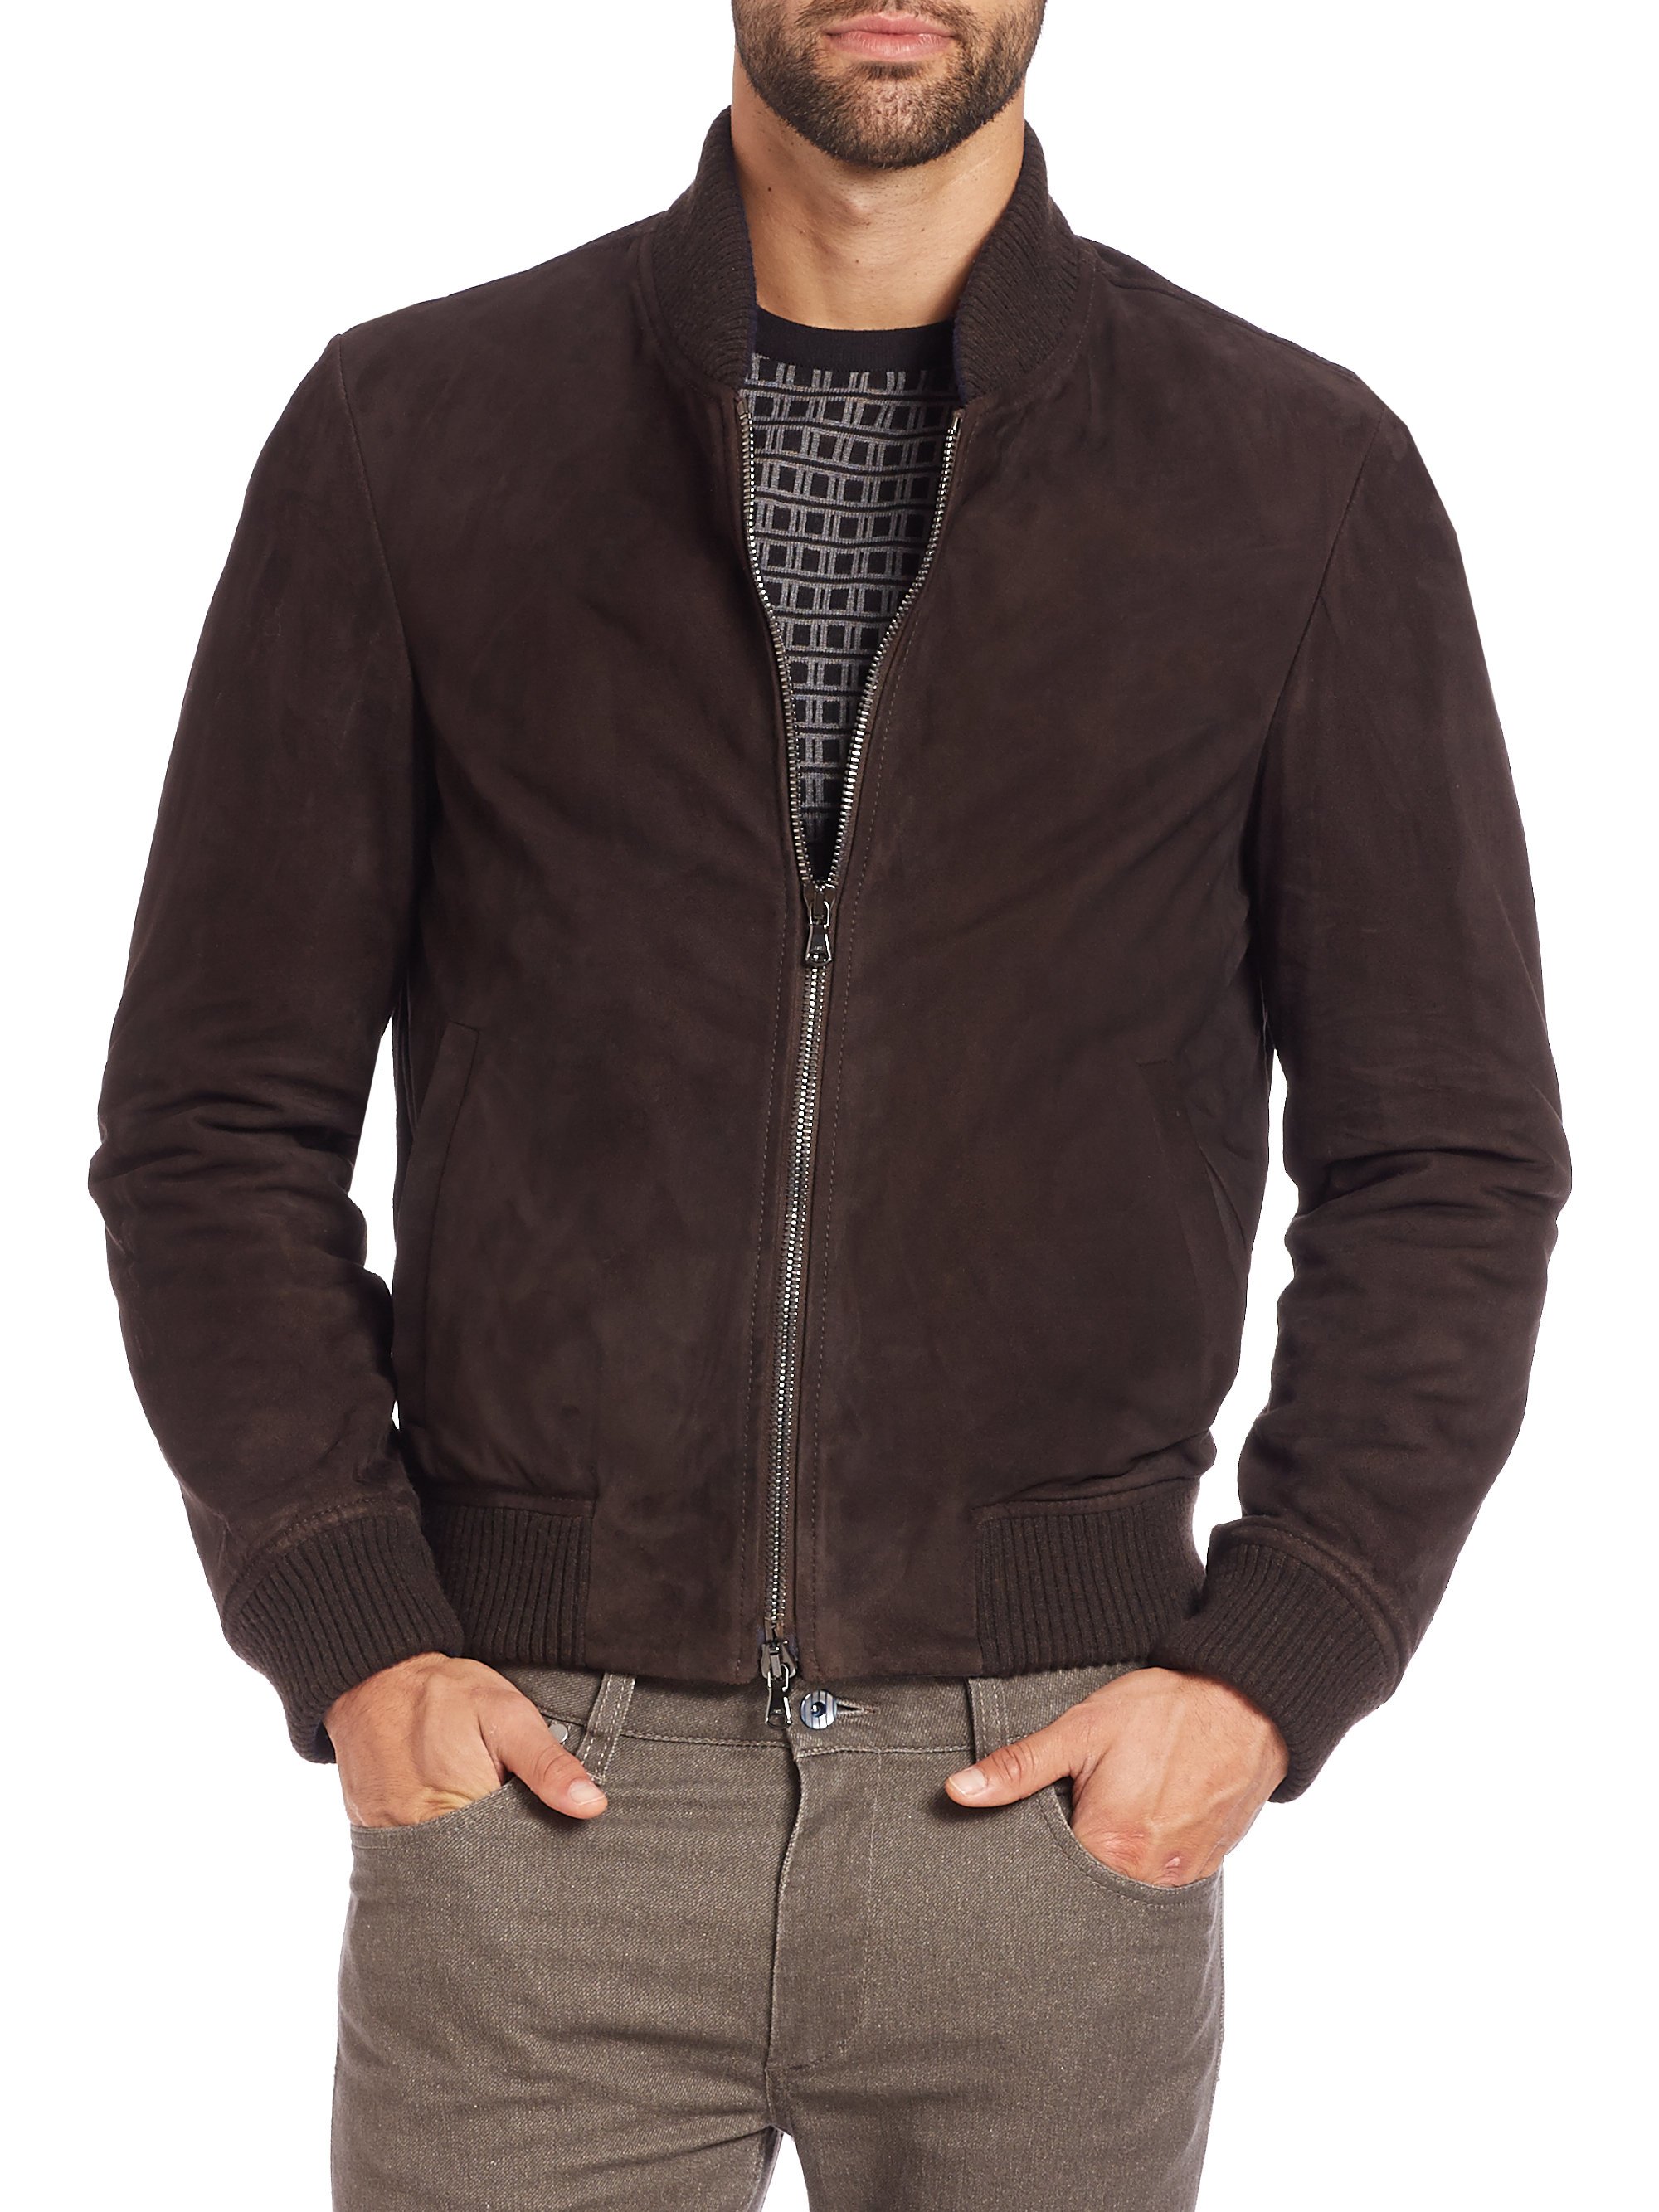 Lyst - Saks Fifth Avenue Suede Bomber Jacket in Brown for Men